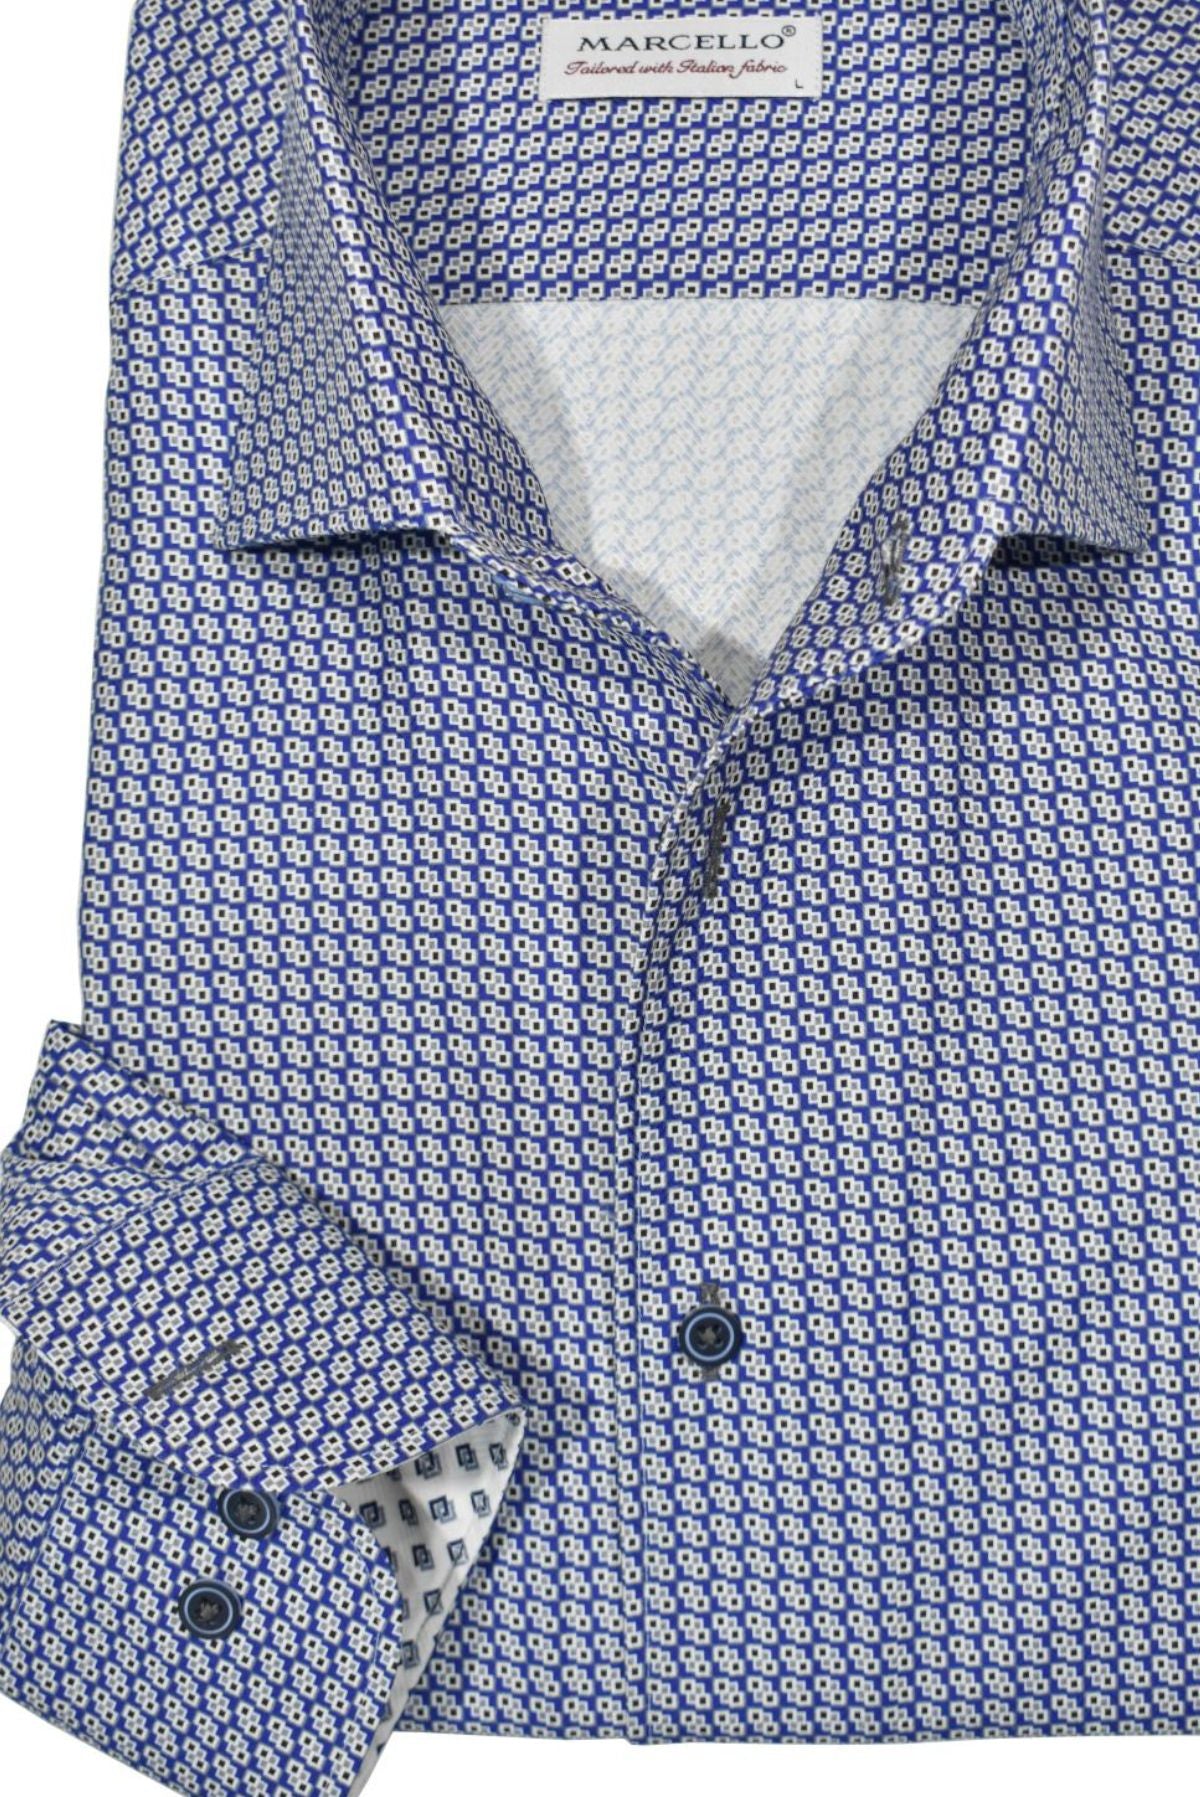 The distinguished Marcello one-piece roll collar is remarkable. It has a distinct standing shape that will draw attention. This shirt is perfect due to its versatile color selection, as well as its stylish micro geometric pattern. The sleeves are adorned with complementary trim fabric and custom buttons. Additionally, the soft cotton fabric provides a timeless fit.